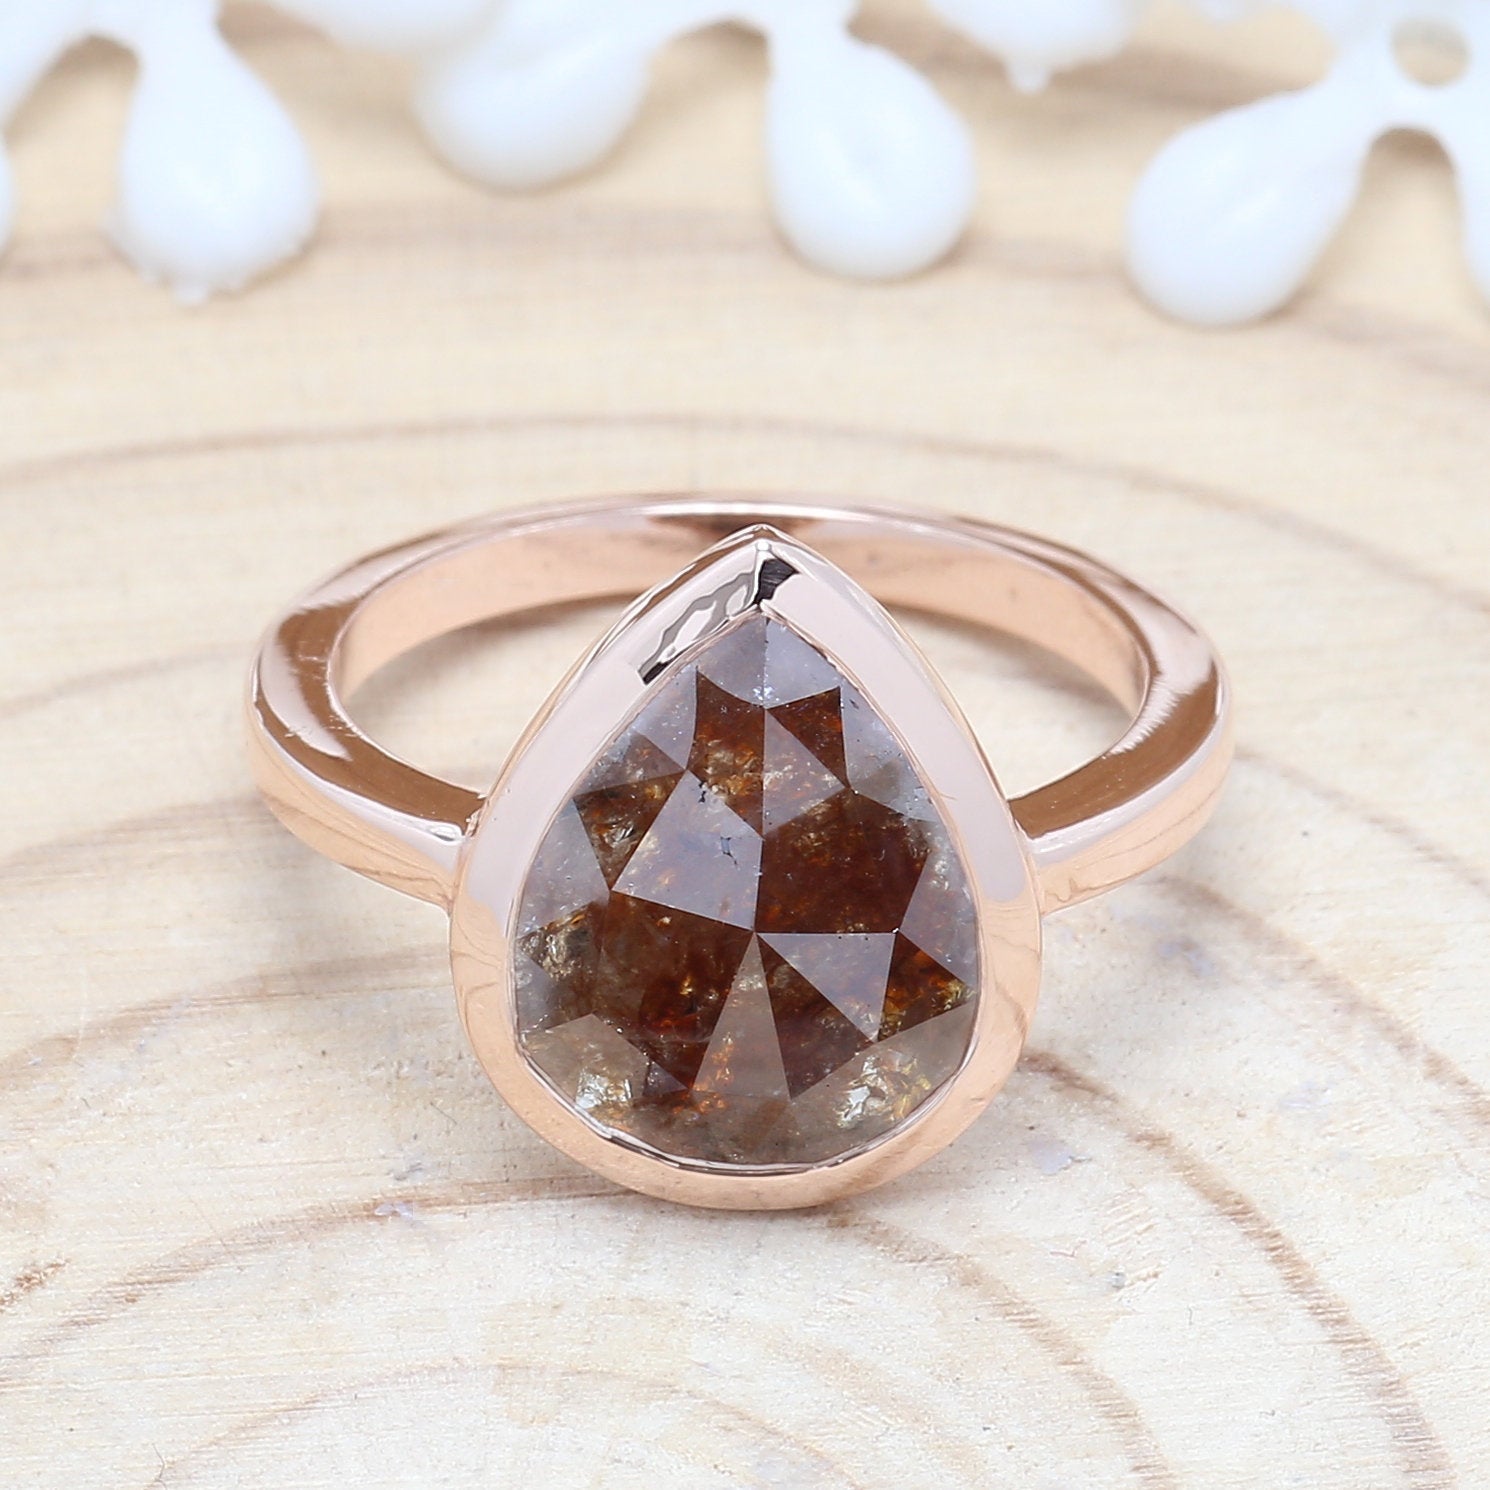 3.58 Ct Brown Pear Diamond 14K Solid Gold Ring Engagement Wedding Gift Ring KDL8325